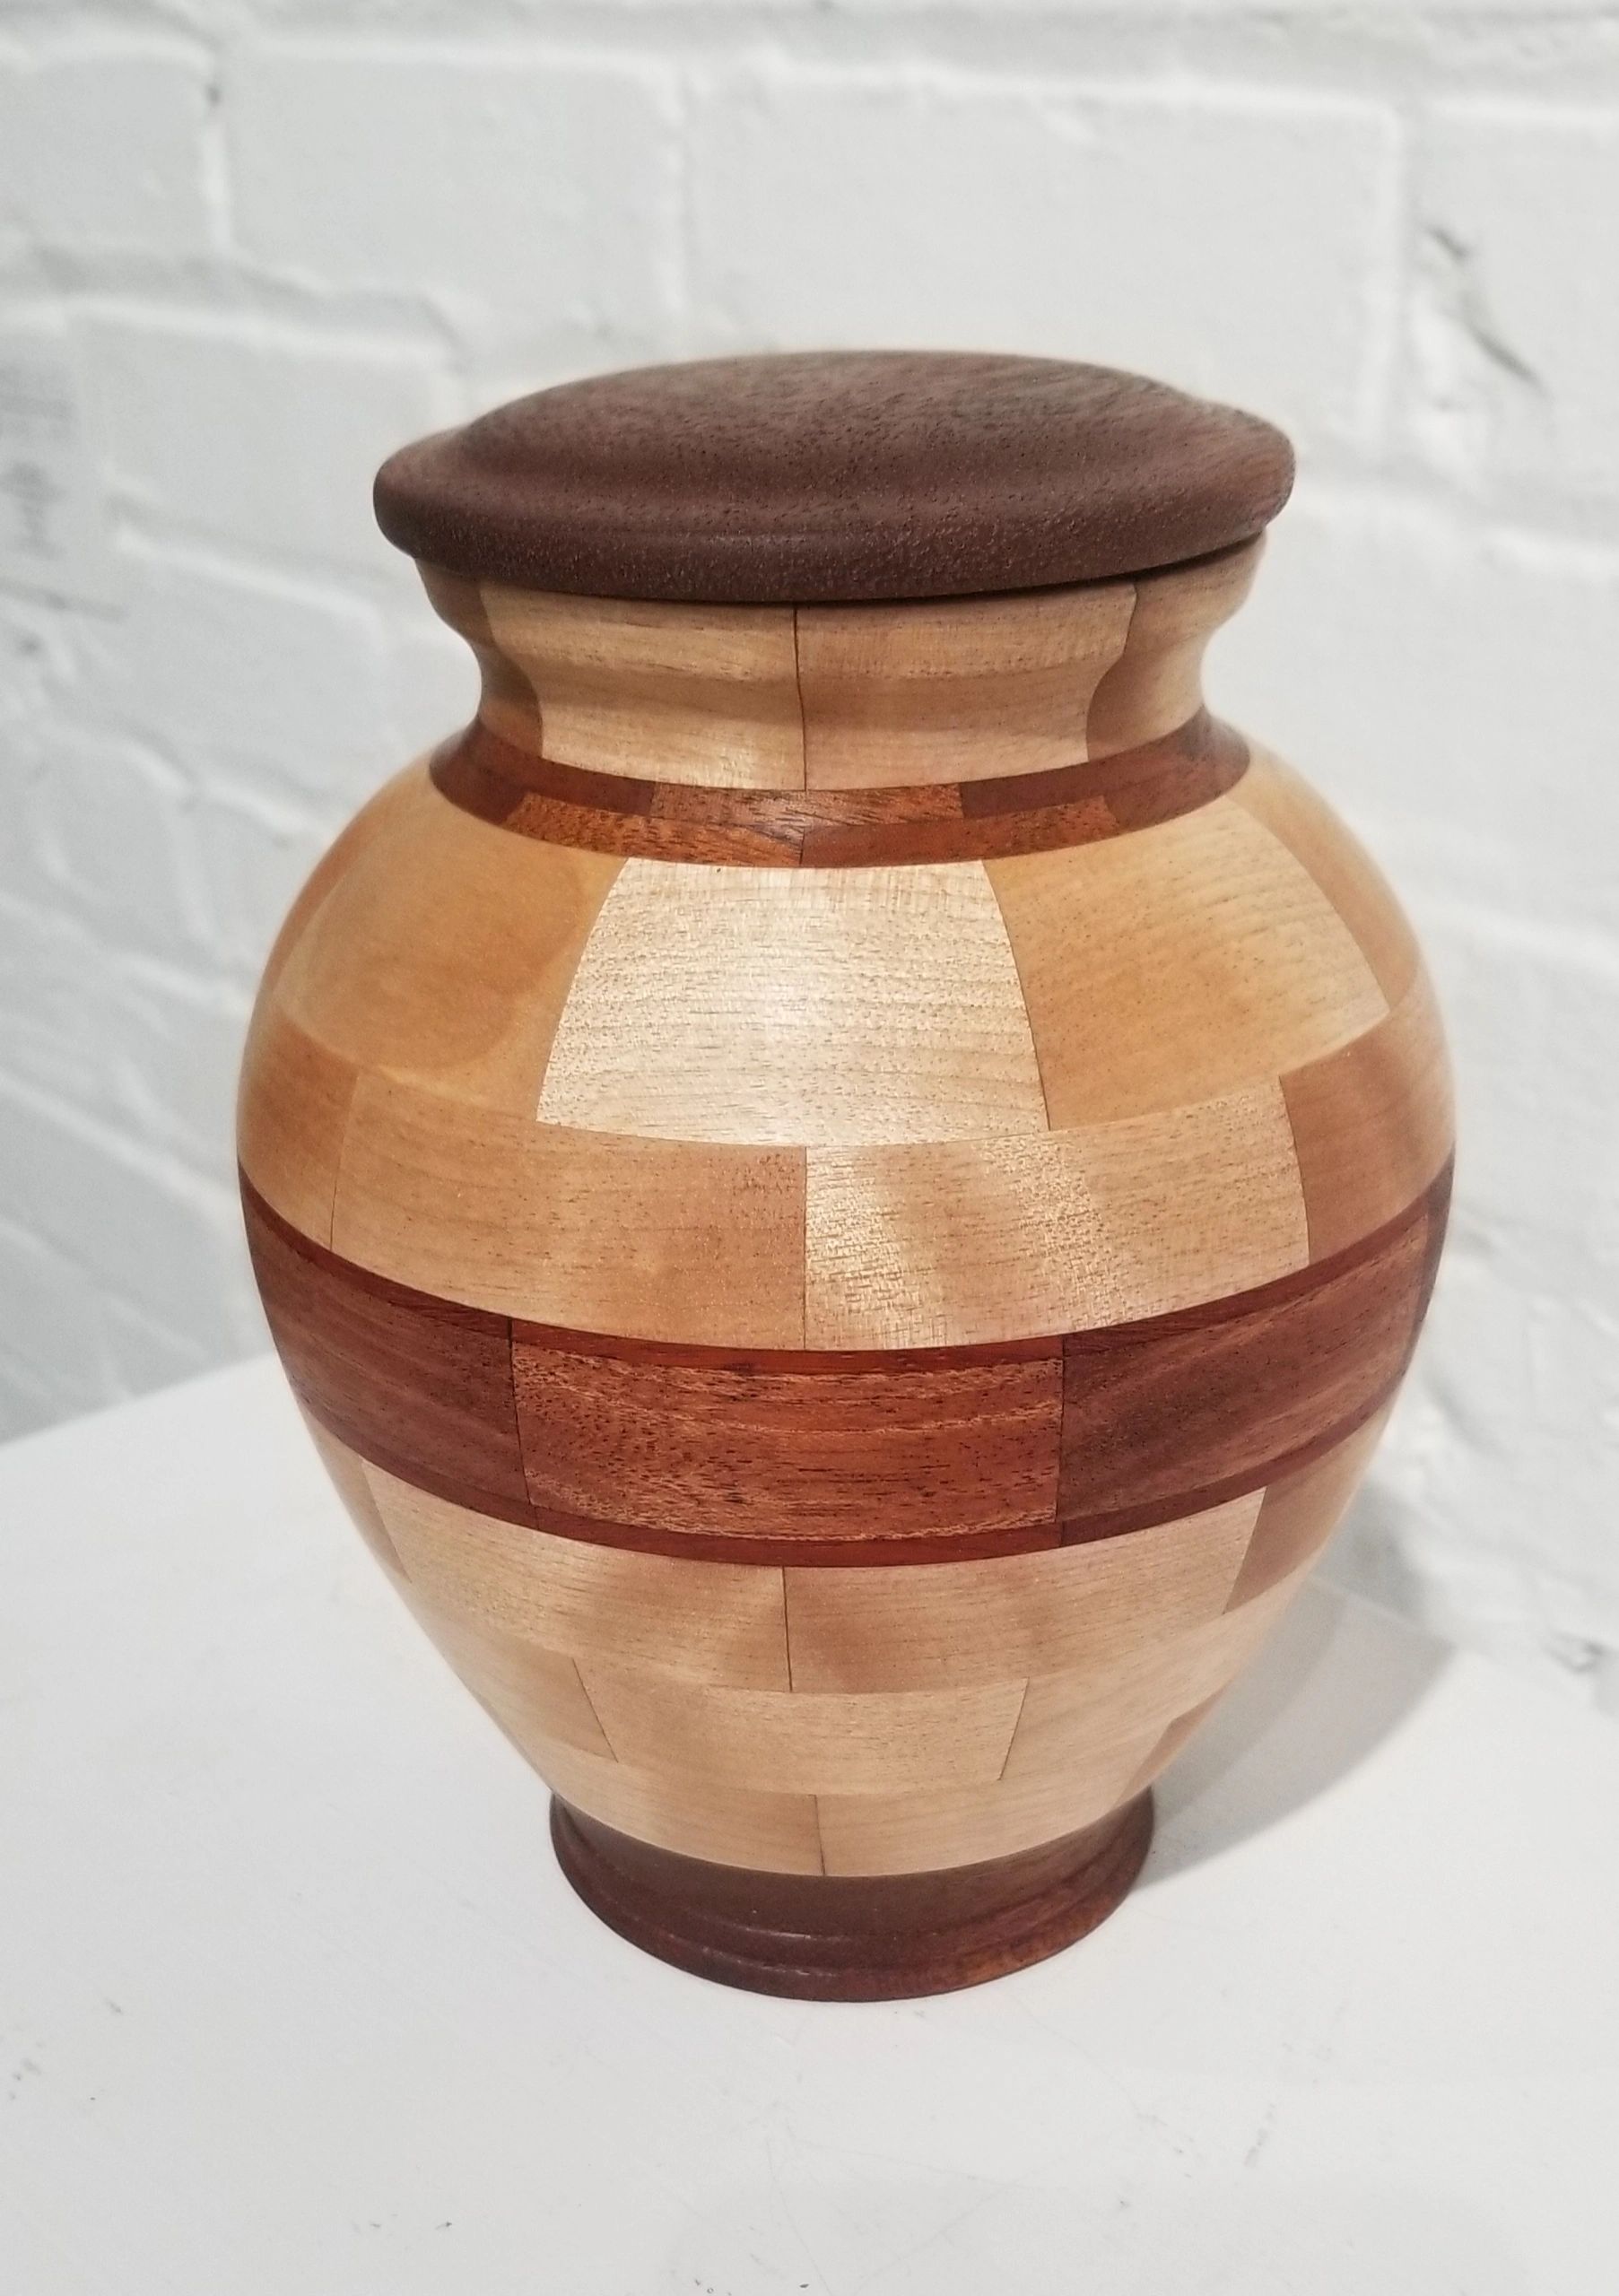 Wooden Urn - Segmented & Turned on a Lathe